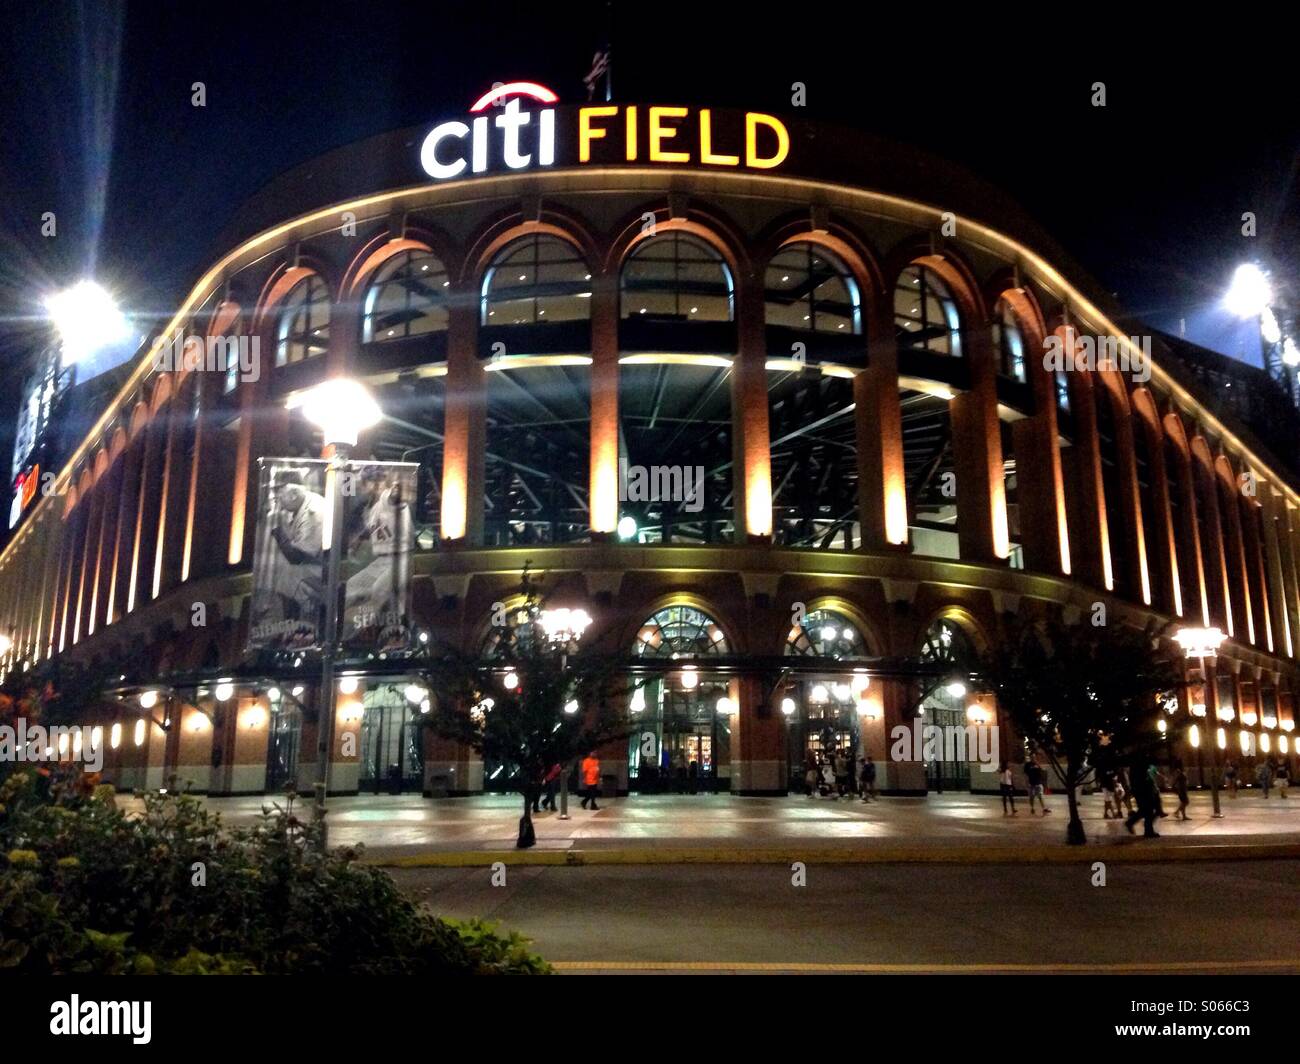 Citifield. Les Mets de New York. Flushing, New York. Banque D'Images